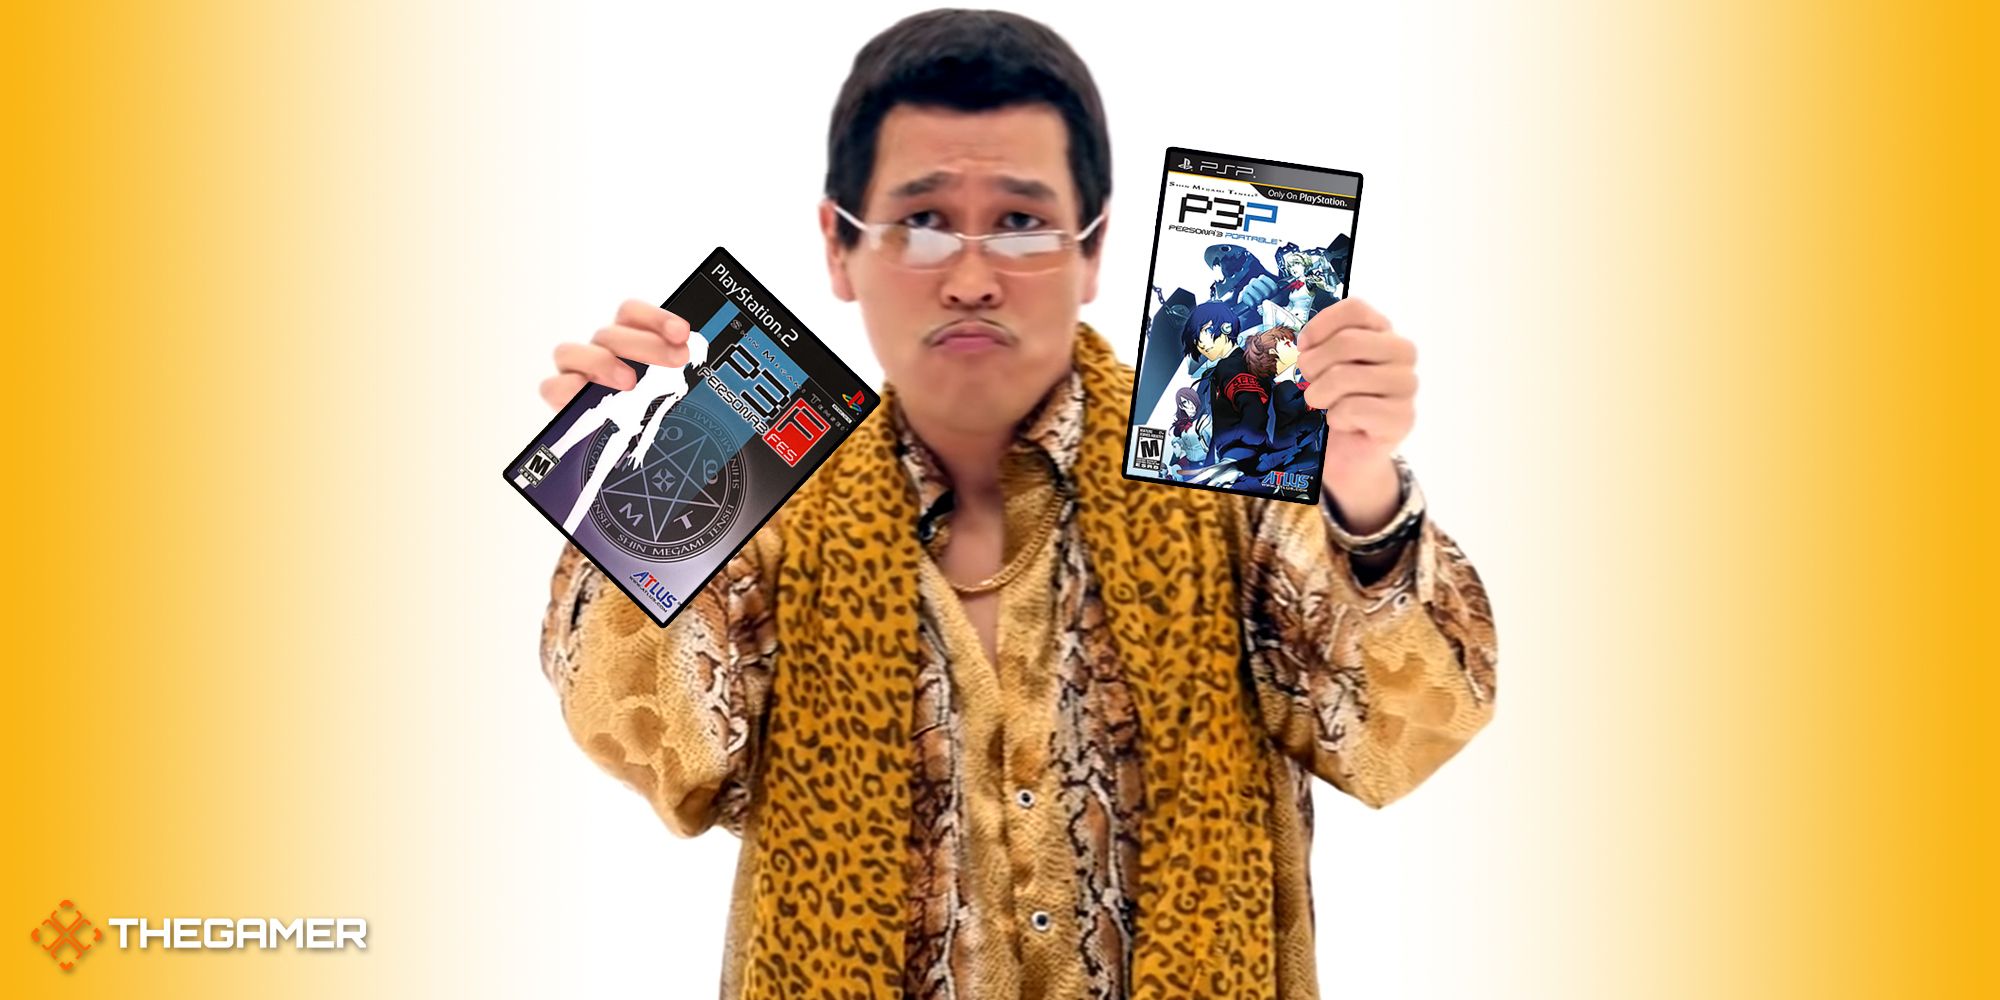 PPAP guy holding Persona 3 Portable and Persona 3 FES.